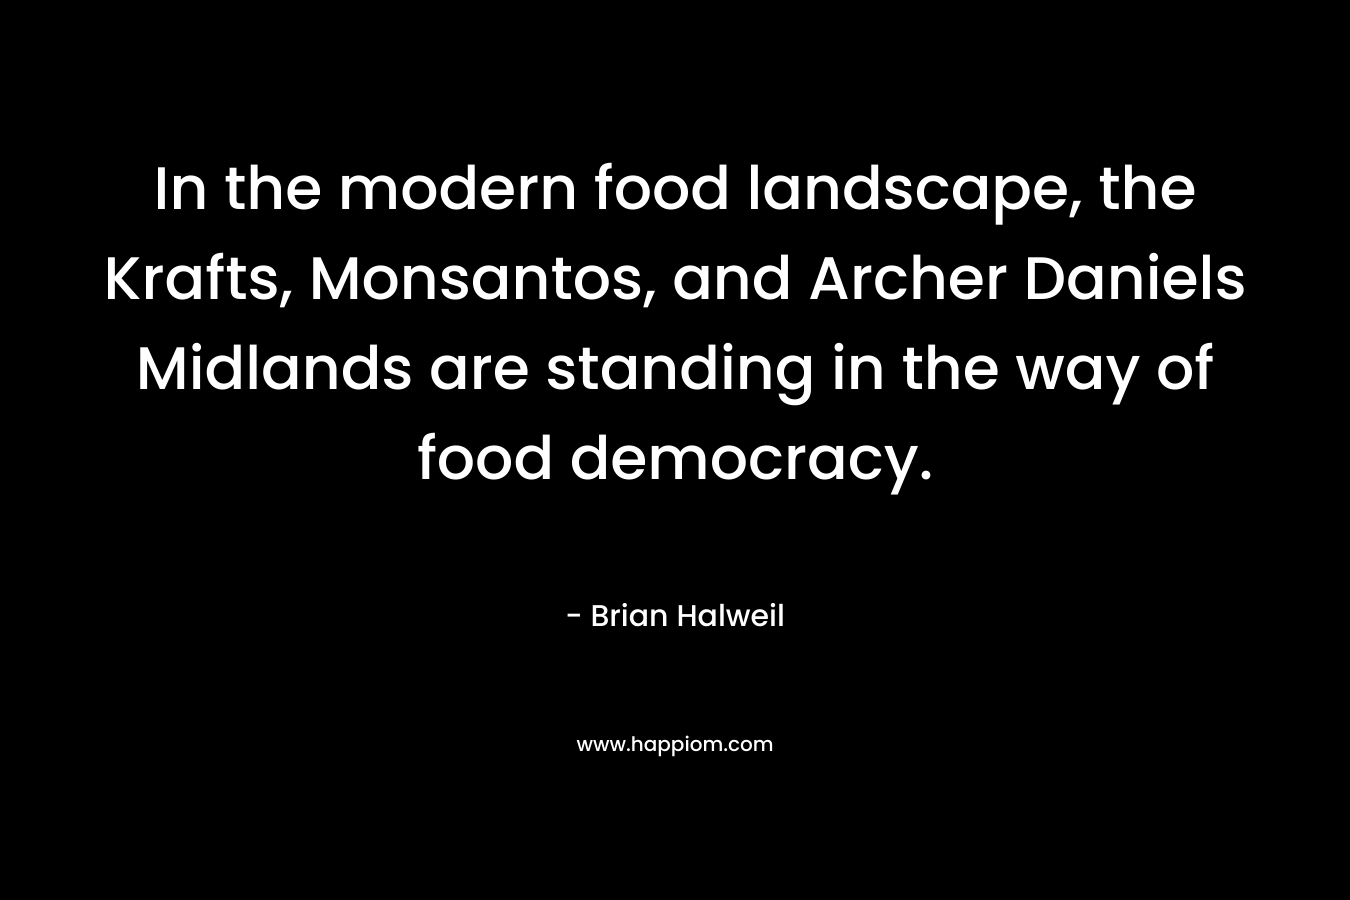 In the modern food landscape, the Krafts, Monsantos, and Archer Daniels Midlands are standing in the way of food democracy.